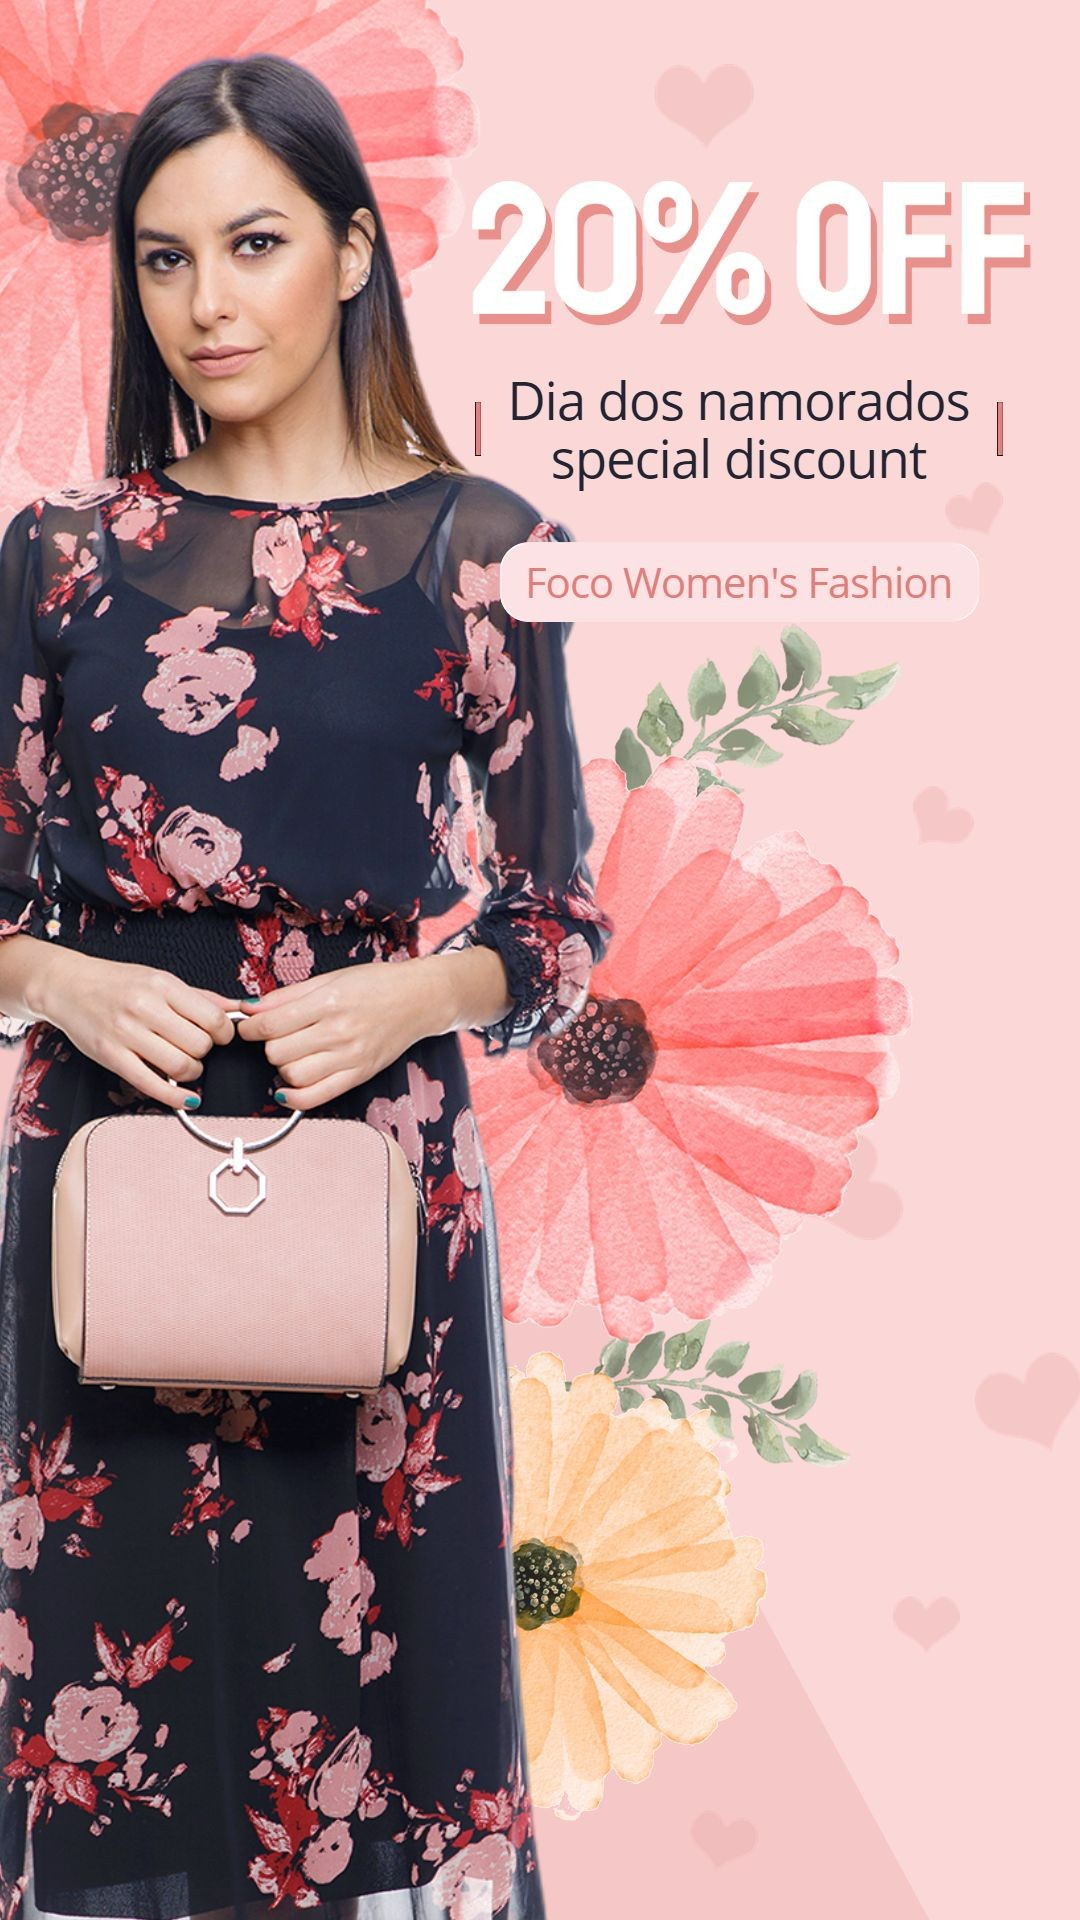 Brazil Valentine's Day Dia dos Namorados Floral Campaign Women's Fashion Discount Sale Promo Ecommerce Story